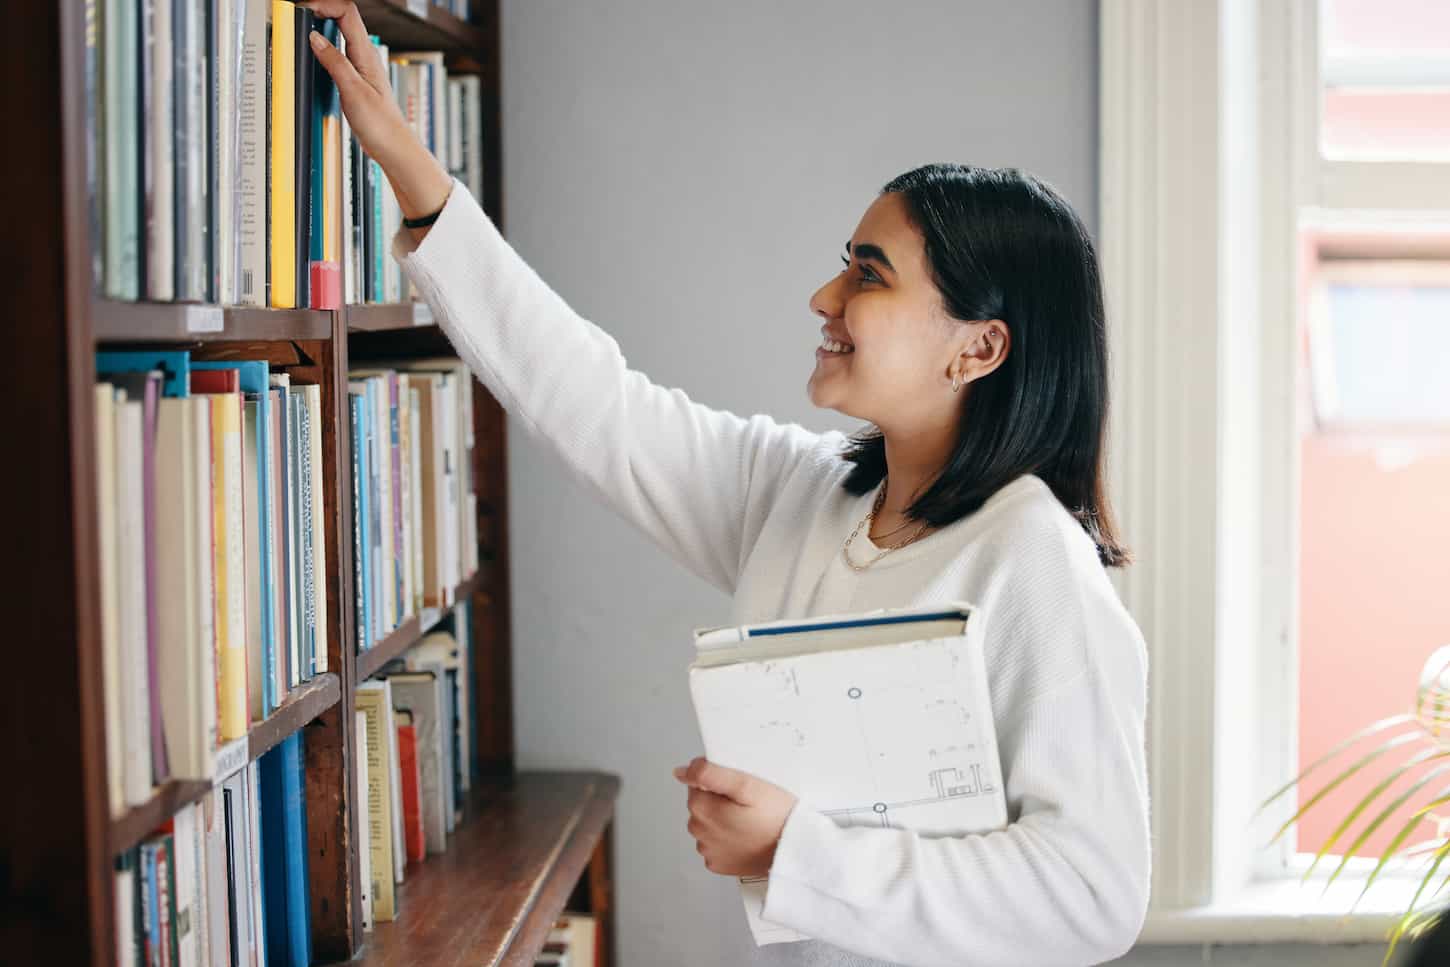 An image of a young woman reading a book in her school library.